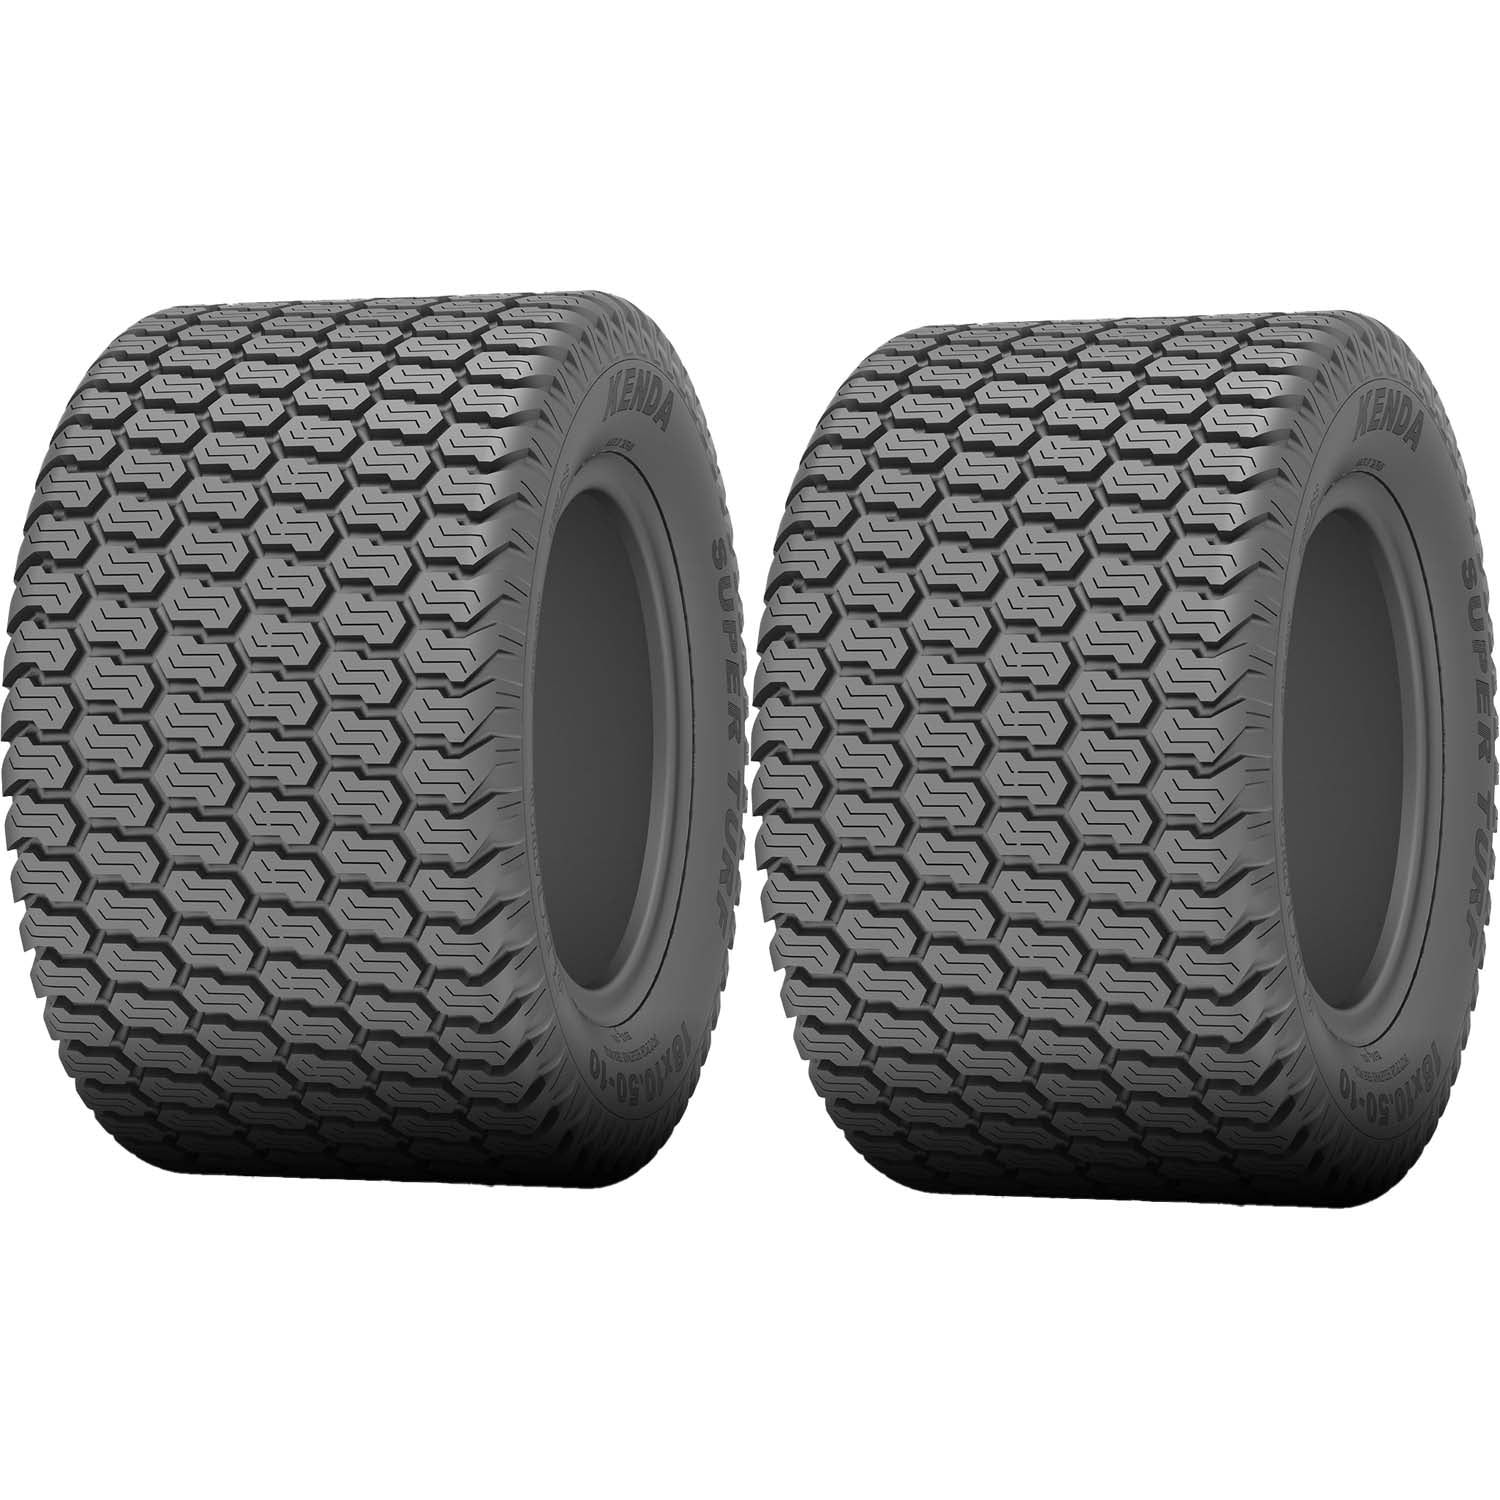 Kenda K500 Super Turf Lawn and Garden Tire 4ply 20X10.50X8 - Pack of 2